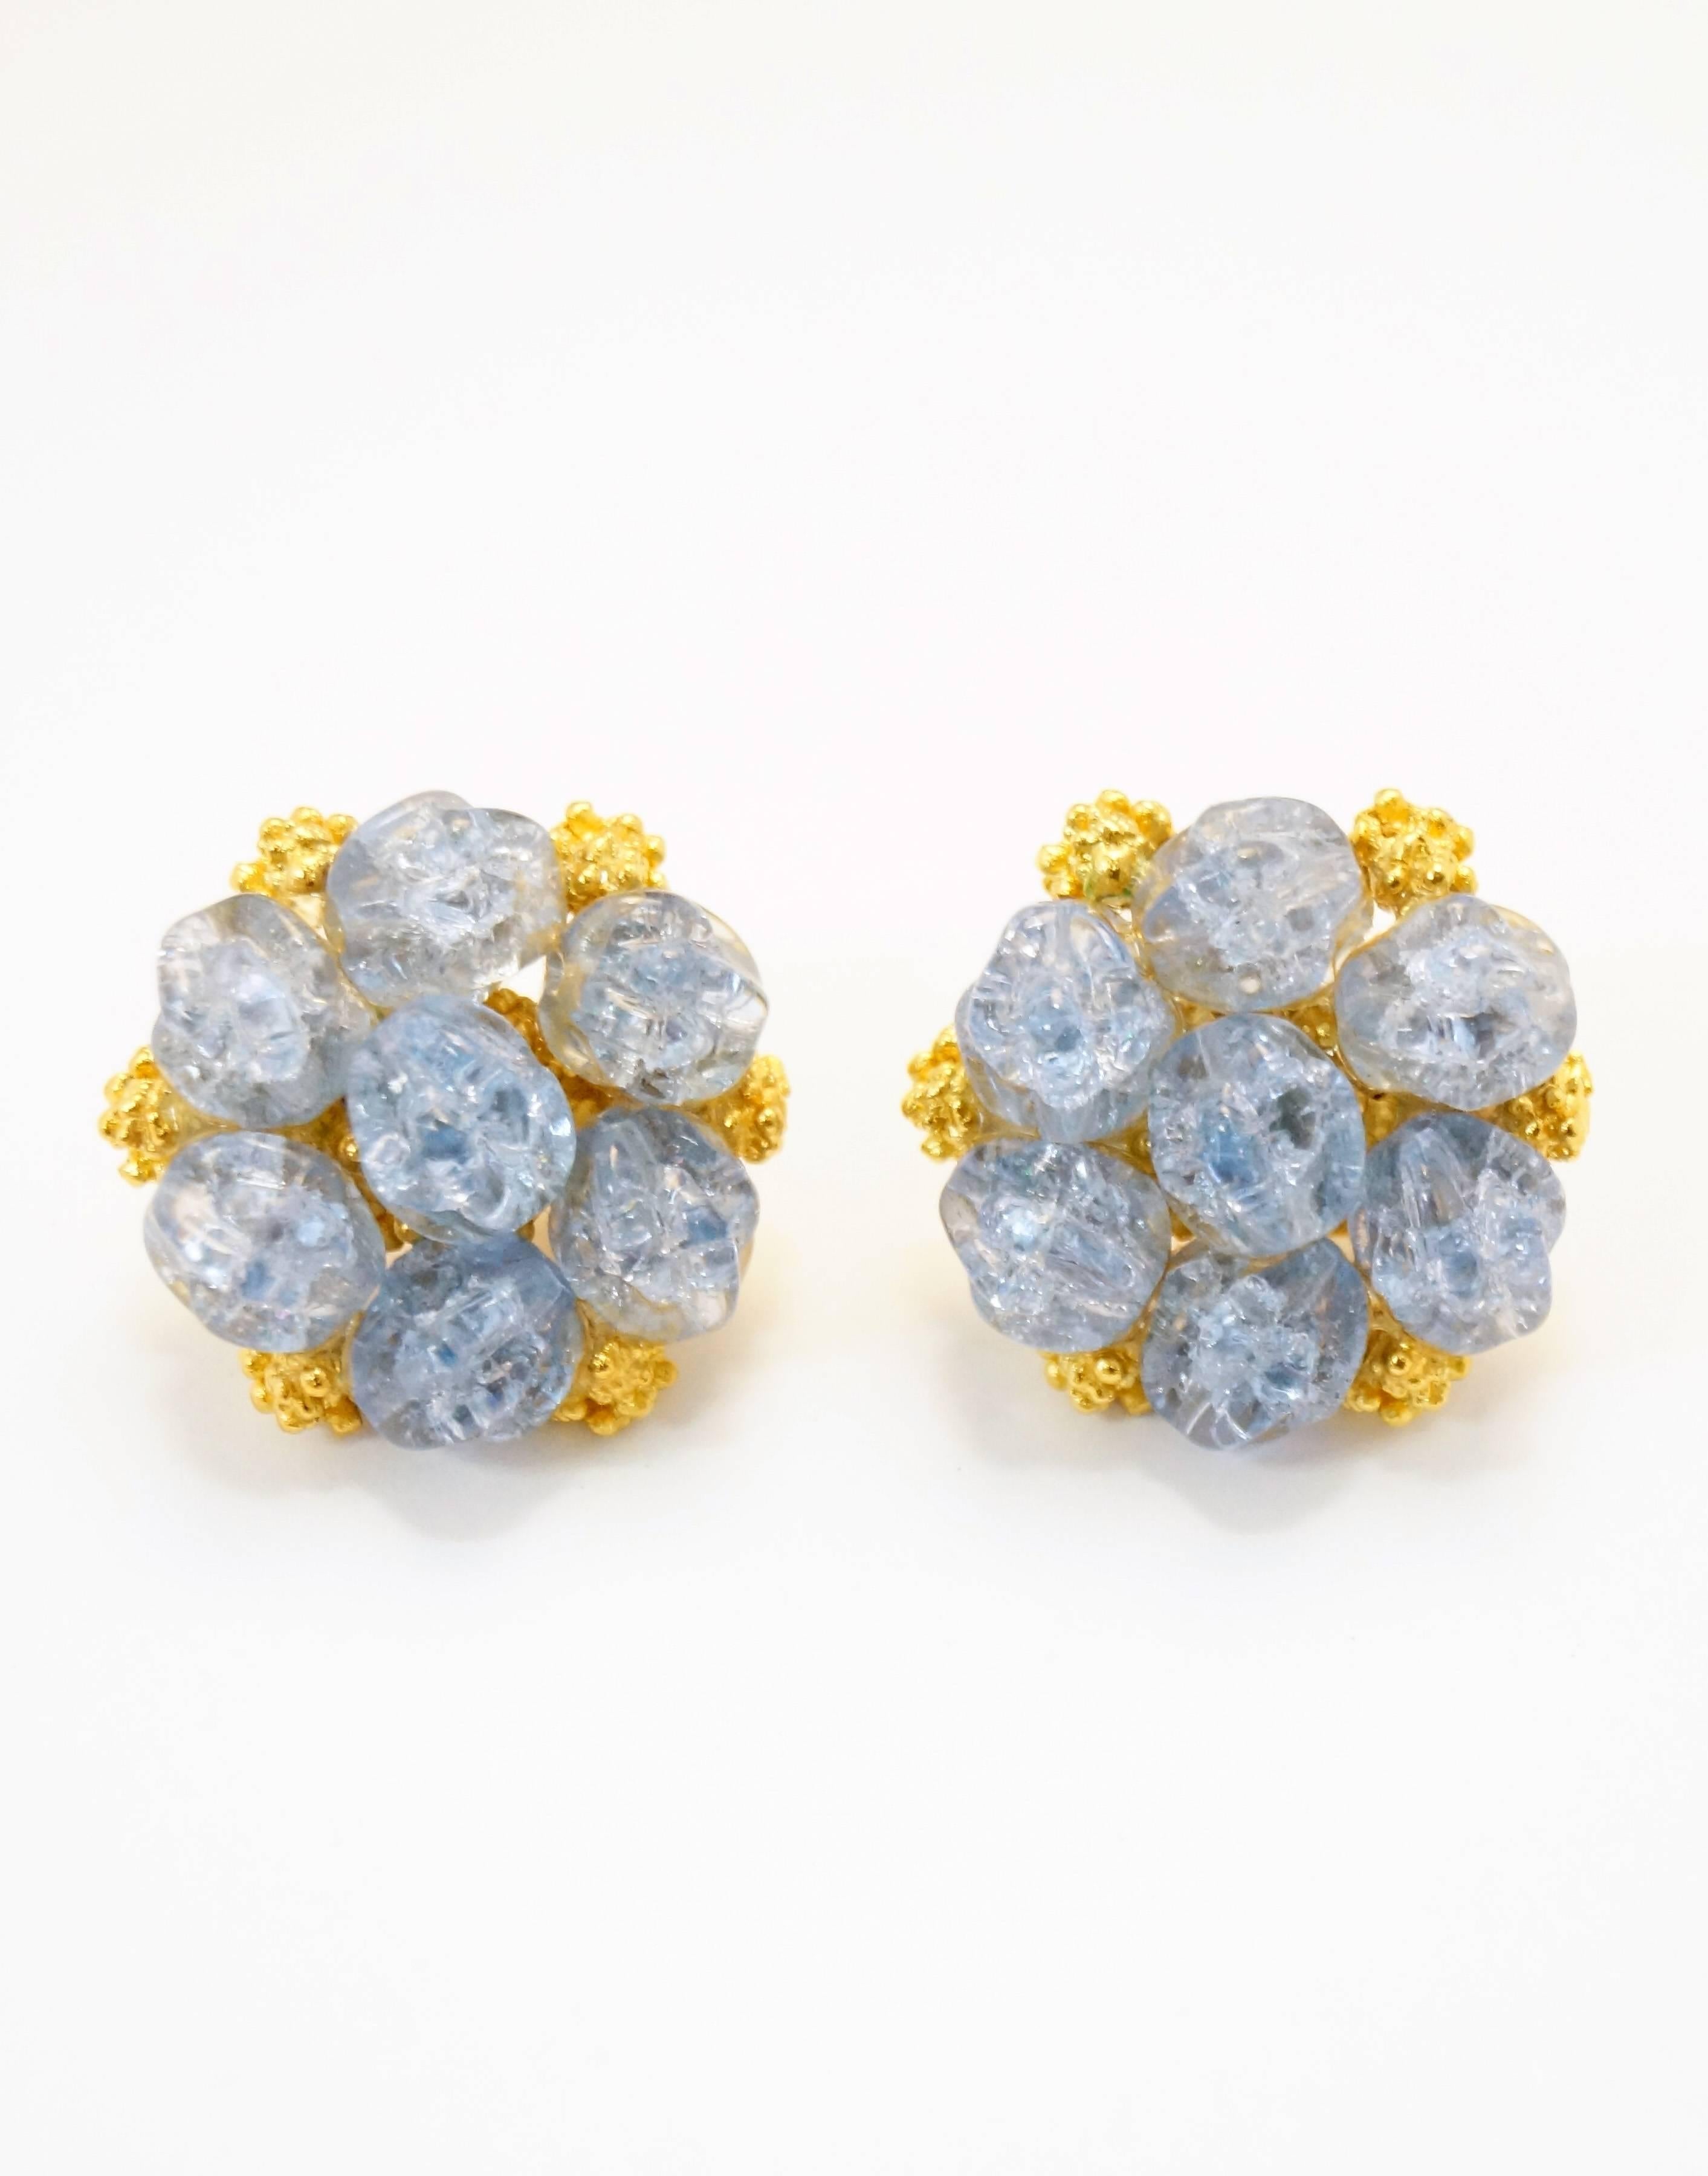 1950s Trifari Grand Parure - Blue Rhinestone with Gold Tone Nugget Spacers For Sale 4